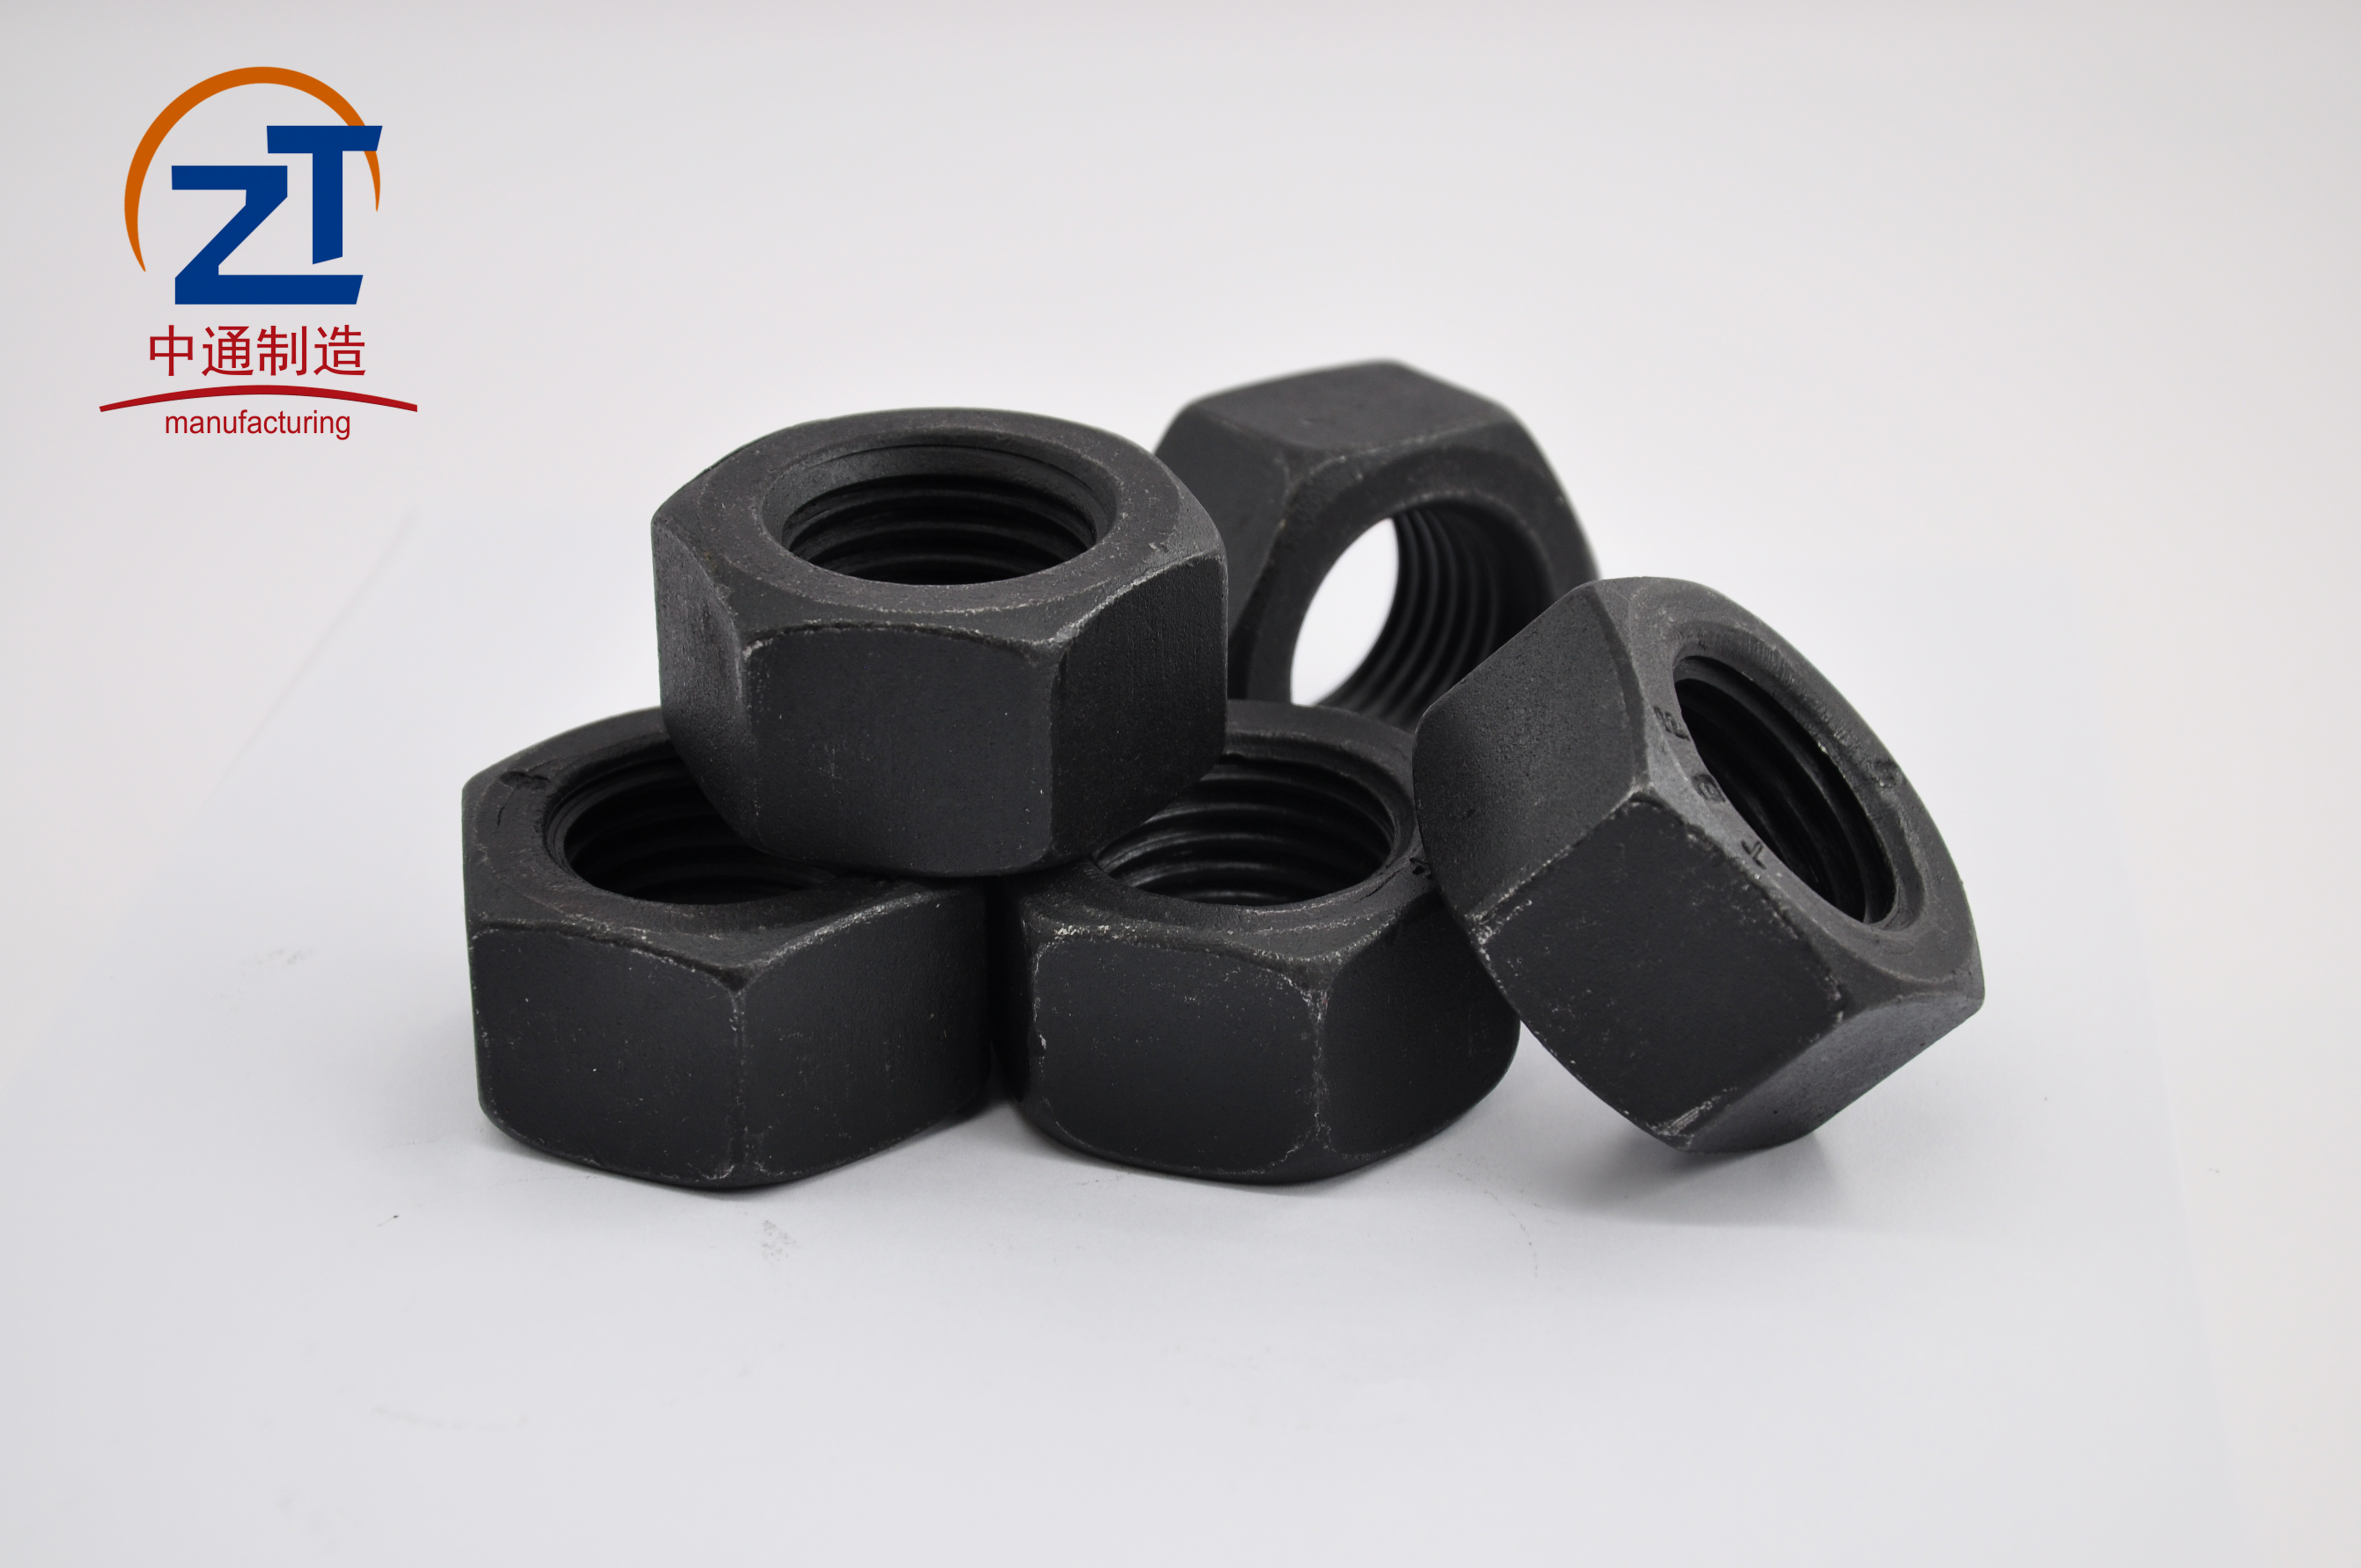 China wholesale custom heavy carbon steel stainless black insert thin hexagon head nut and bolt din934 galvanized m6 m5 hex nut